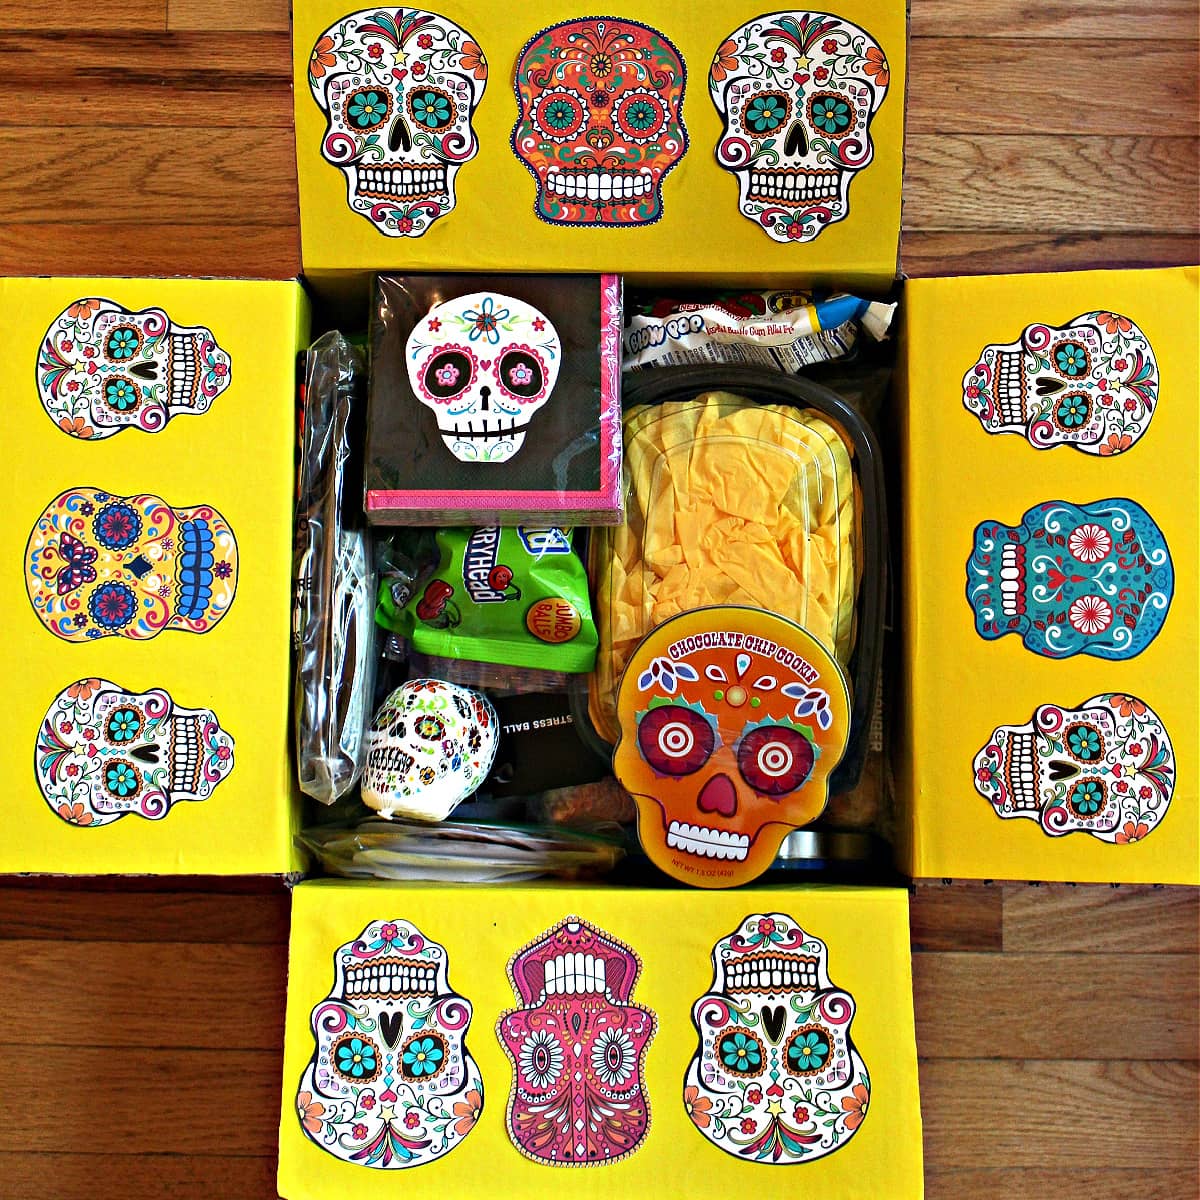 Dia de los Muertos box decorated with skulls and filled with goodies.